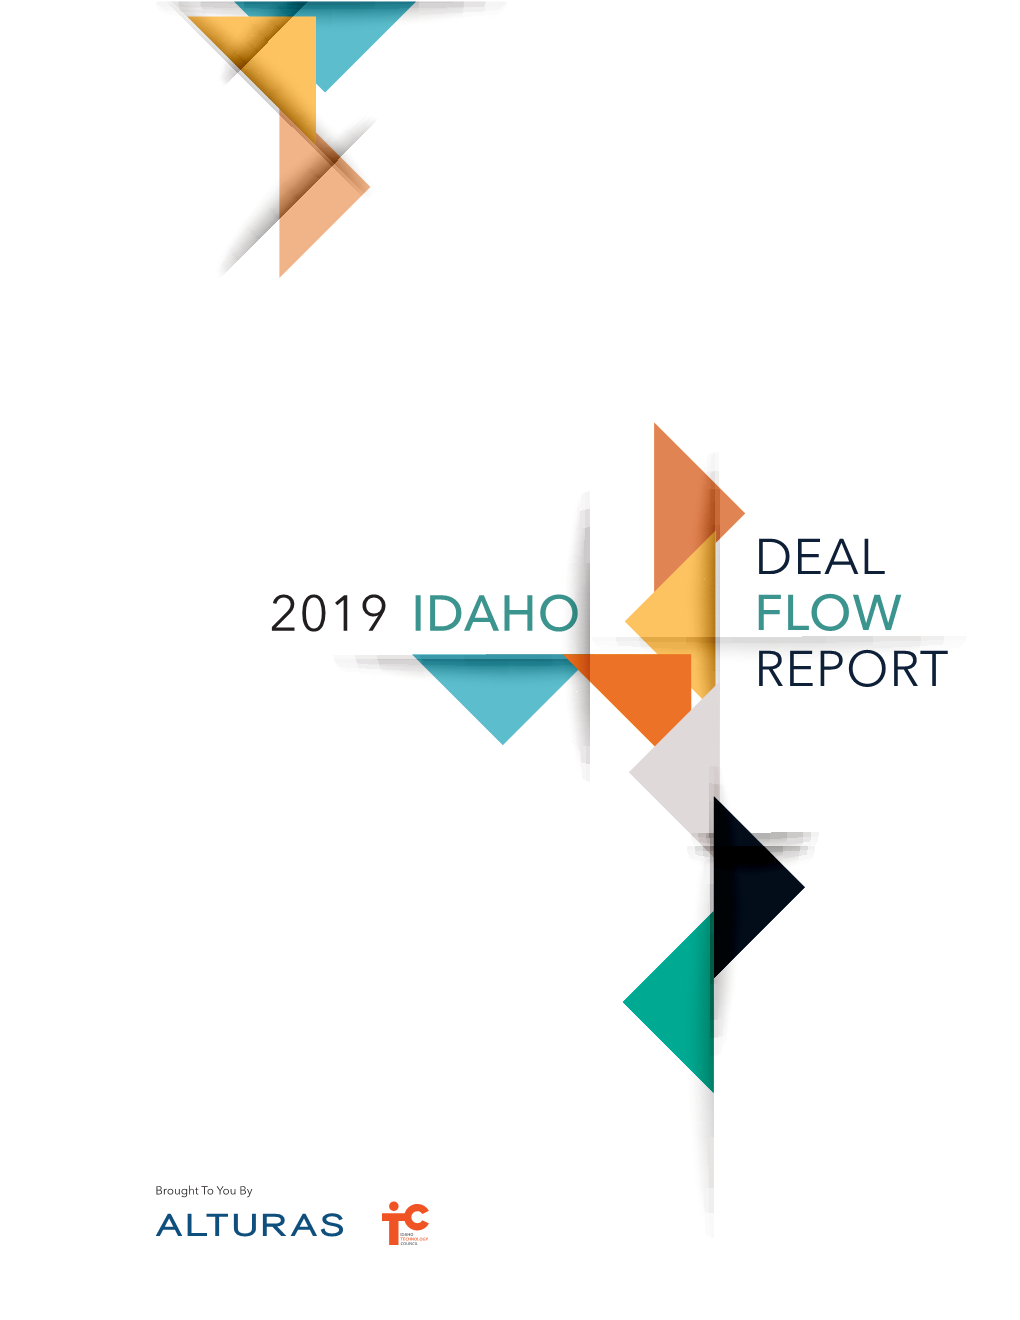 2019 Idaho Deal Flow Report, a Publication We Eagerly Await Every Year Because It Spotlights Many of the Industries Flourishing in Idaho and Their Investment Partners